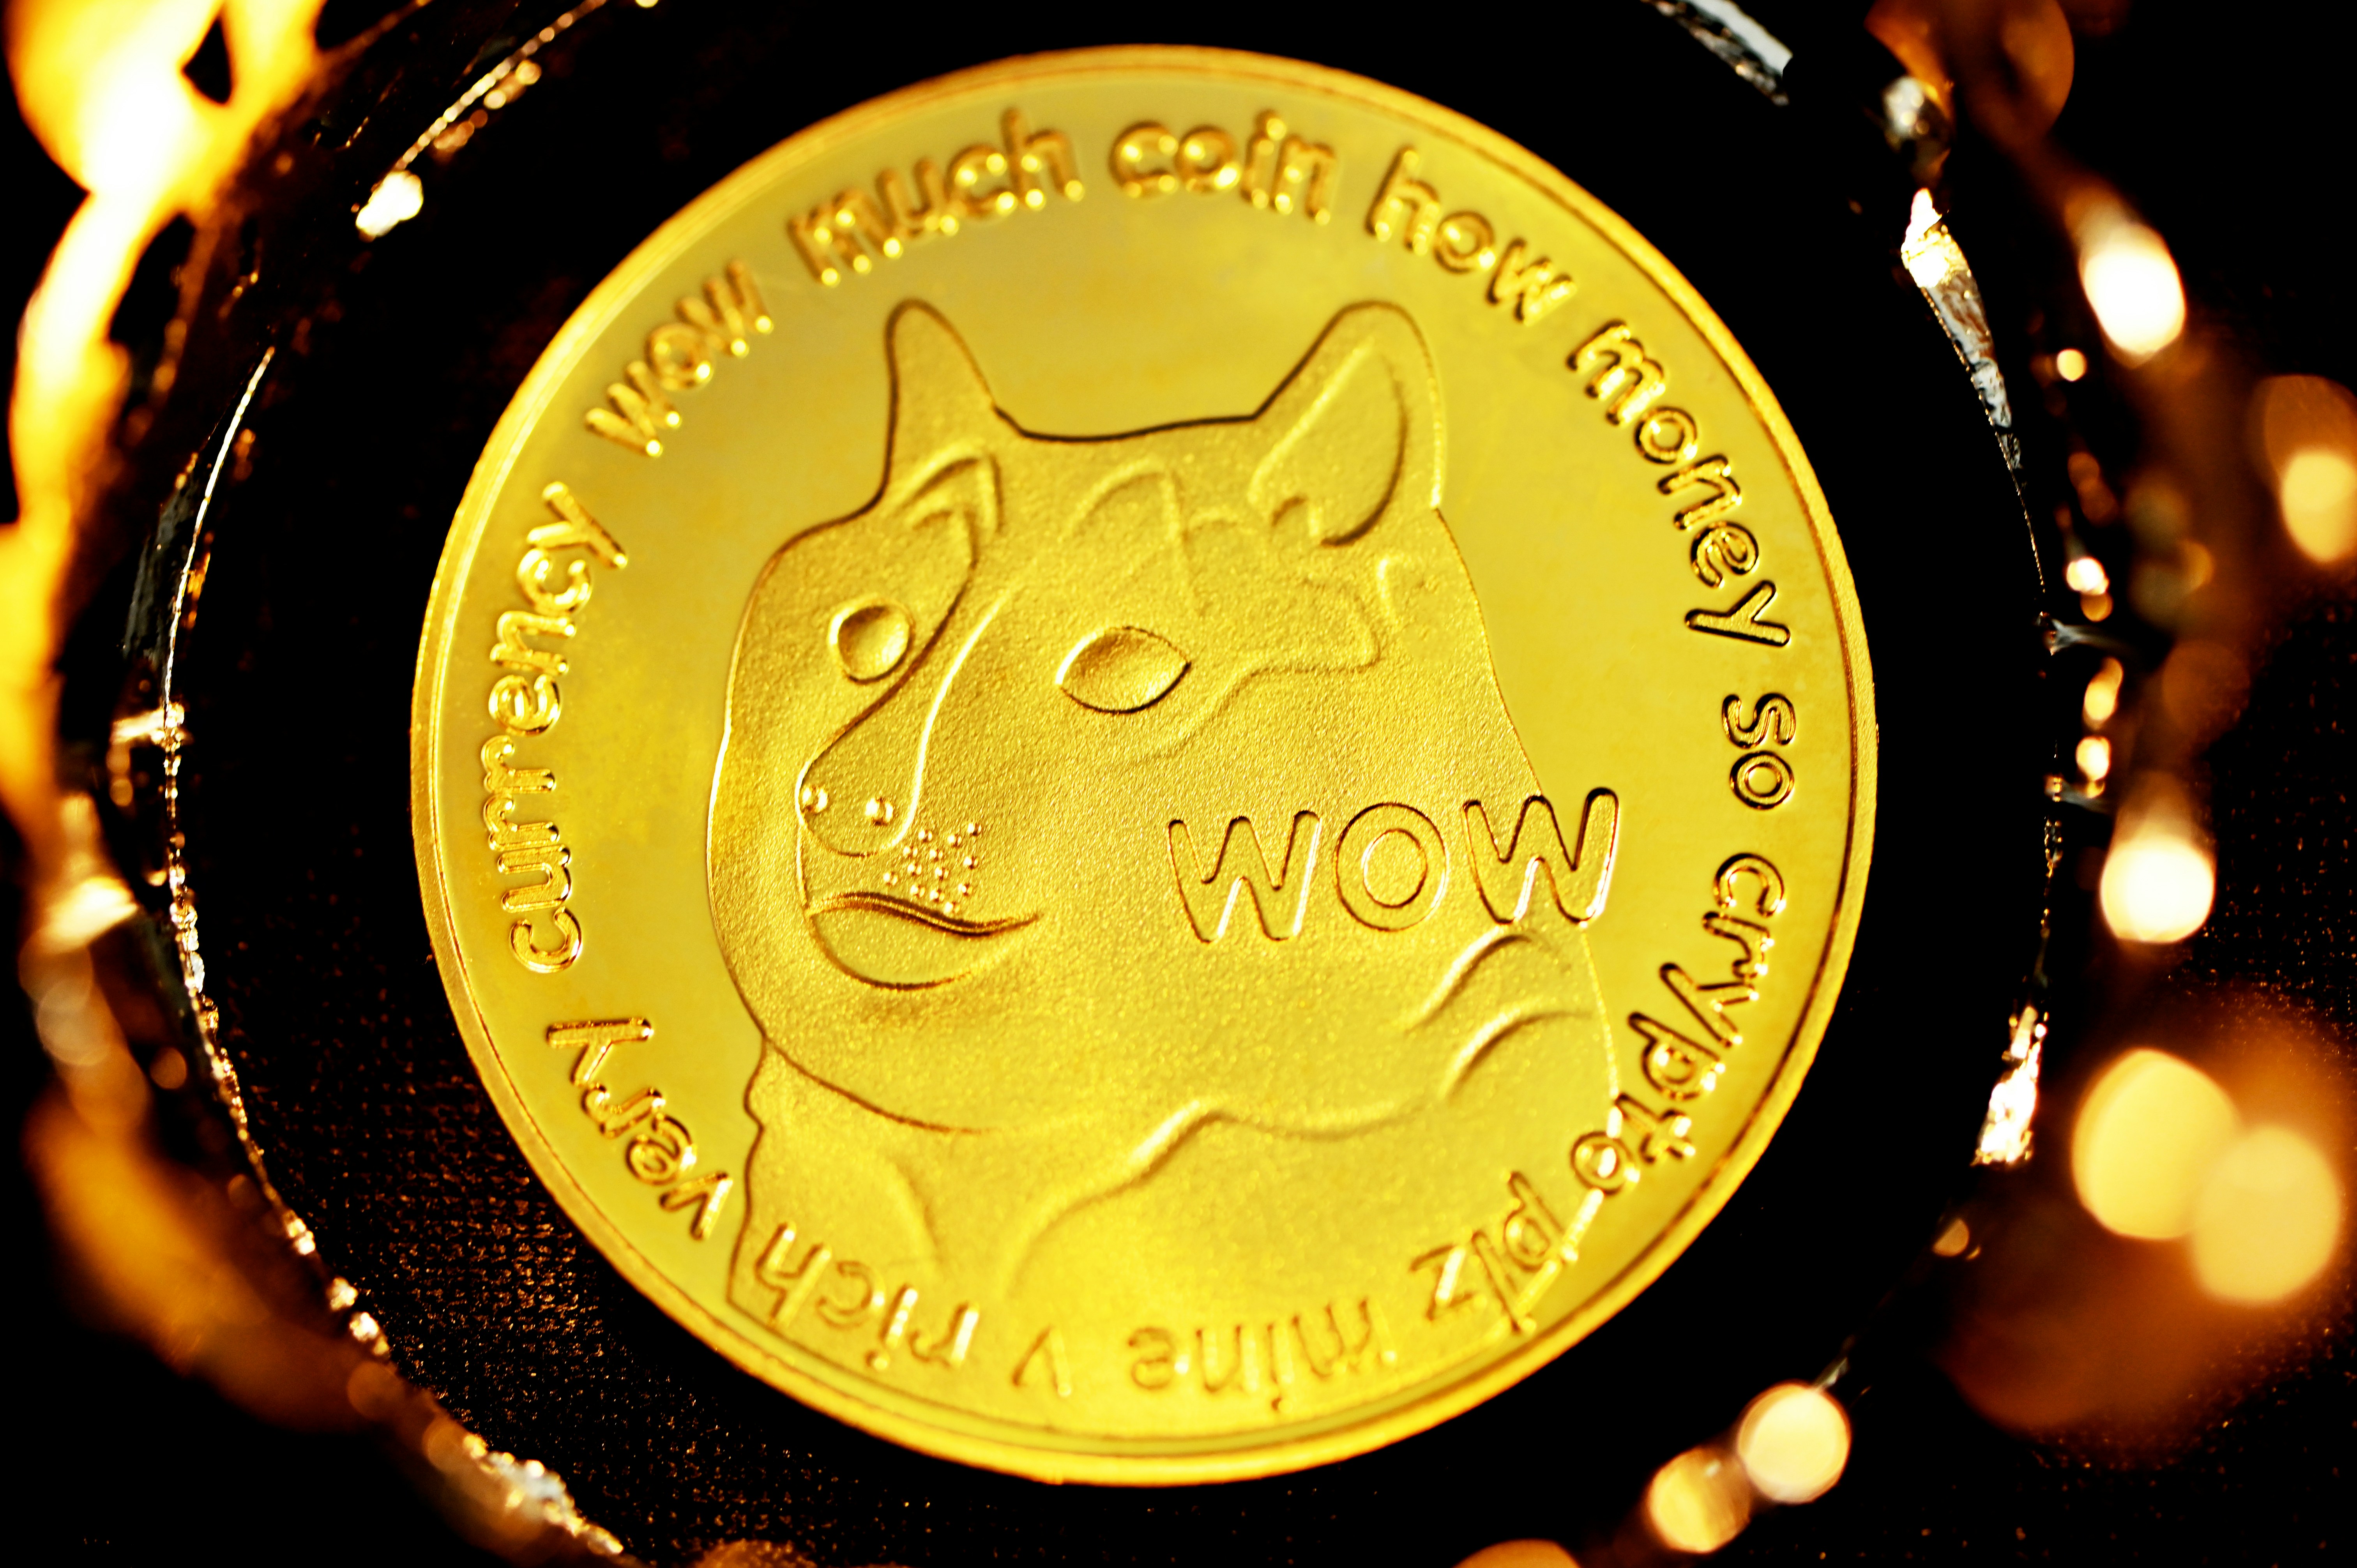 A Dogecoin on top of the opening of a bottle.